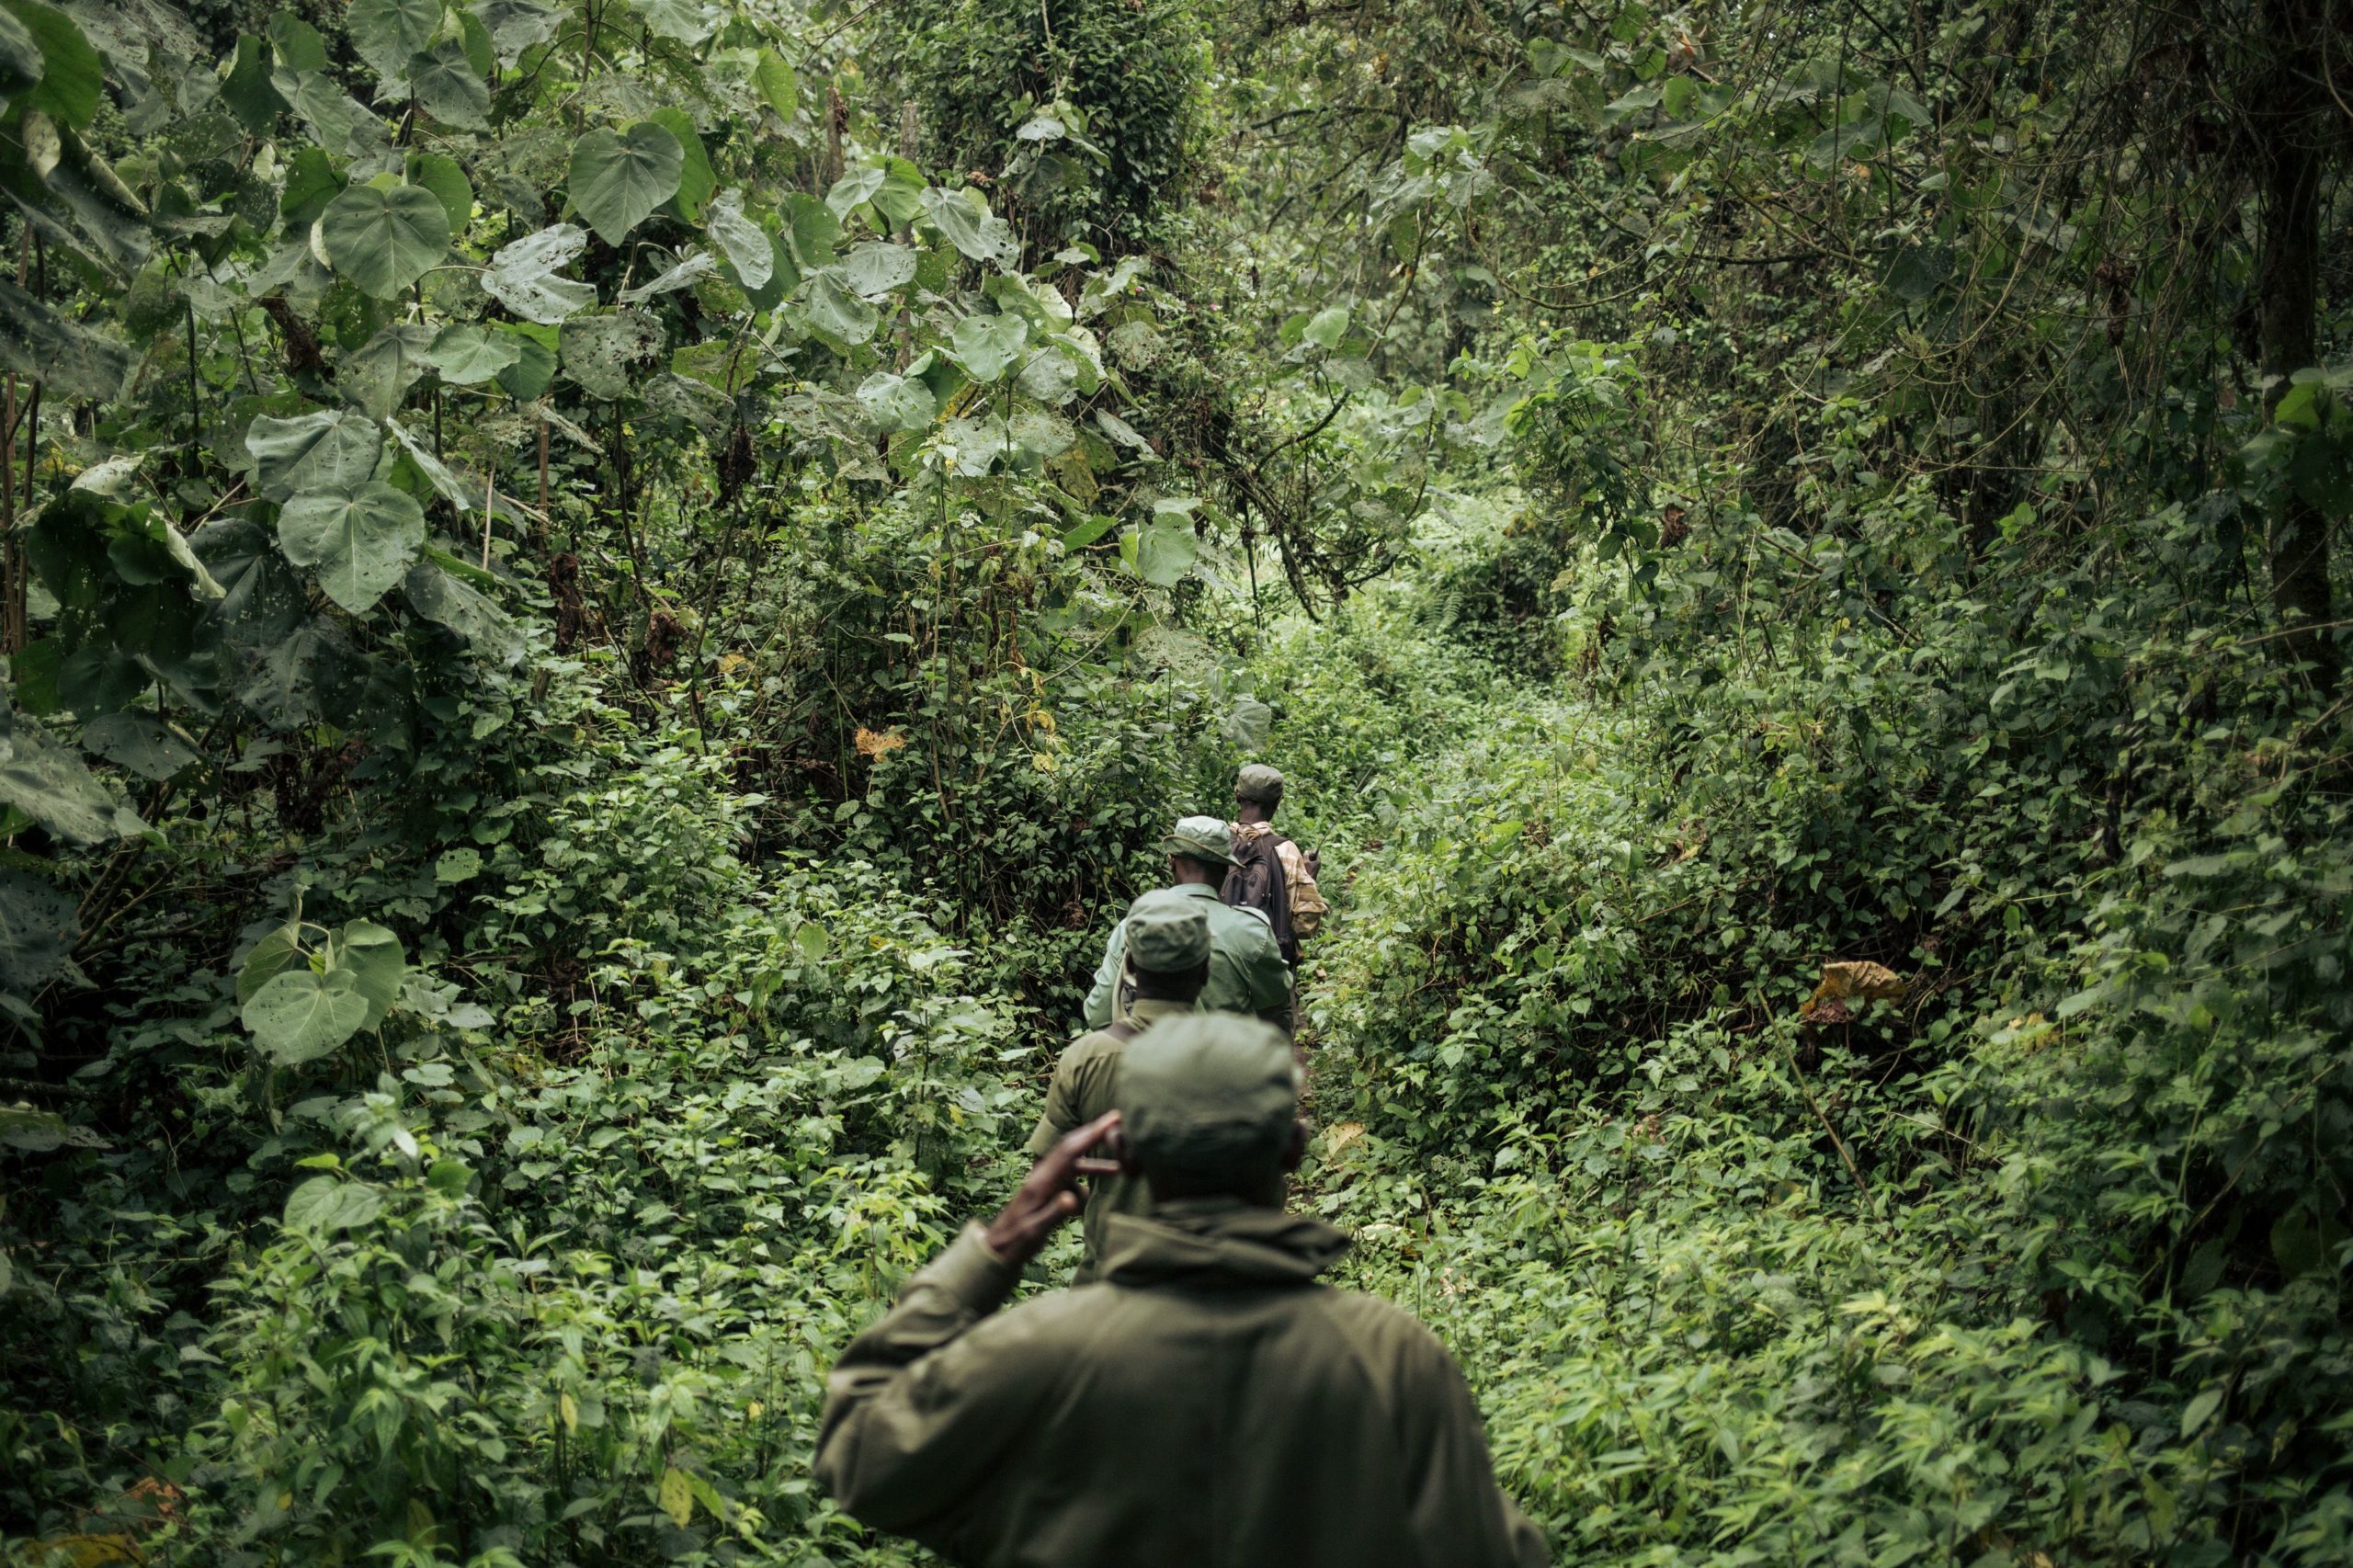 Rangers from Kahuzi-Biega National Park in northeastern Democratic Republic of Congo walk through the forest sheltering the critically endangered gorillas on Sept. 30, 2019. (Alexis Huguet/AFP via Getty Images)